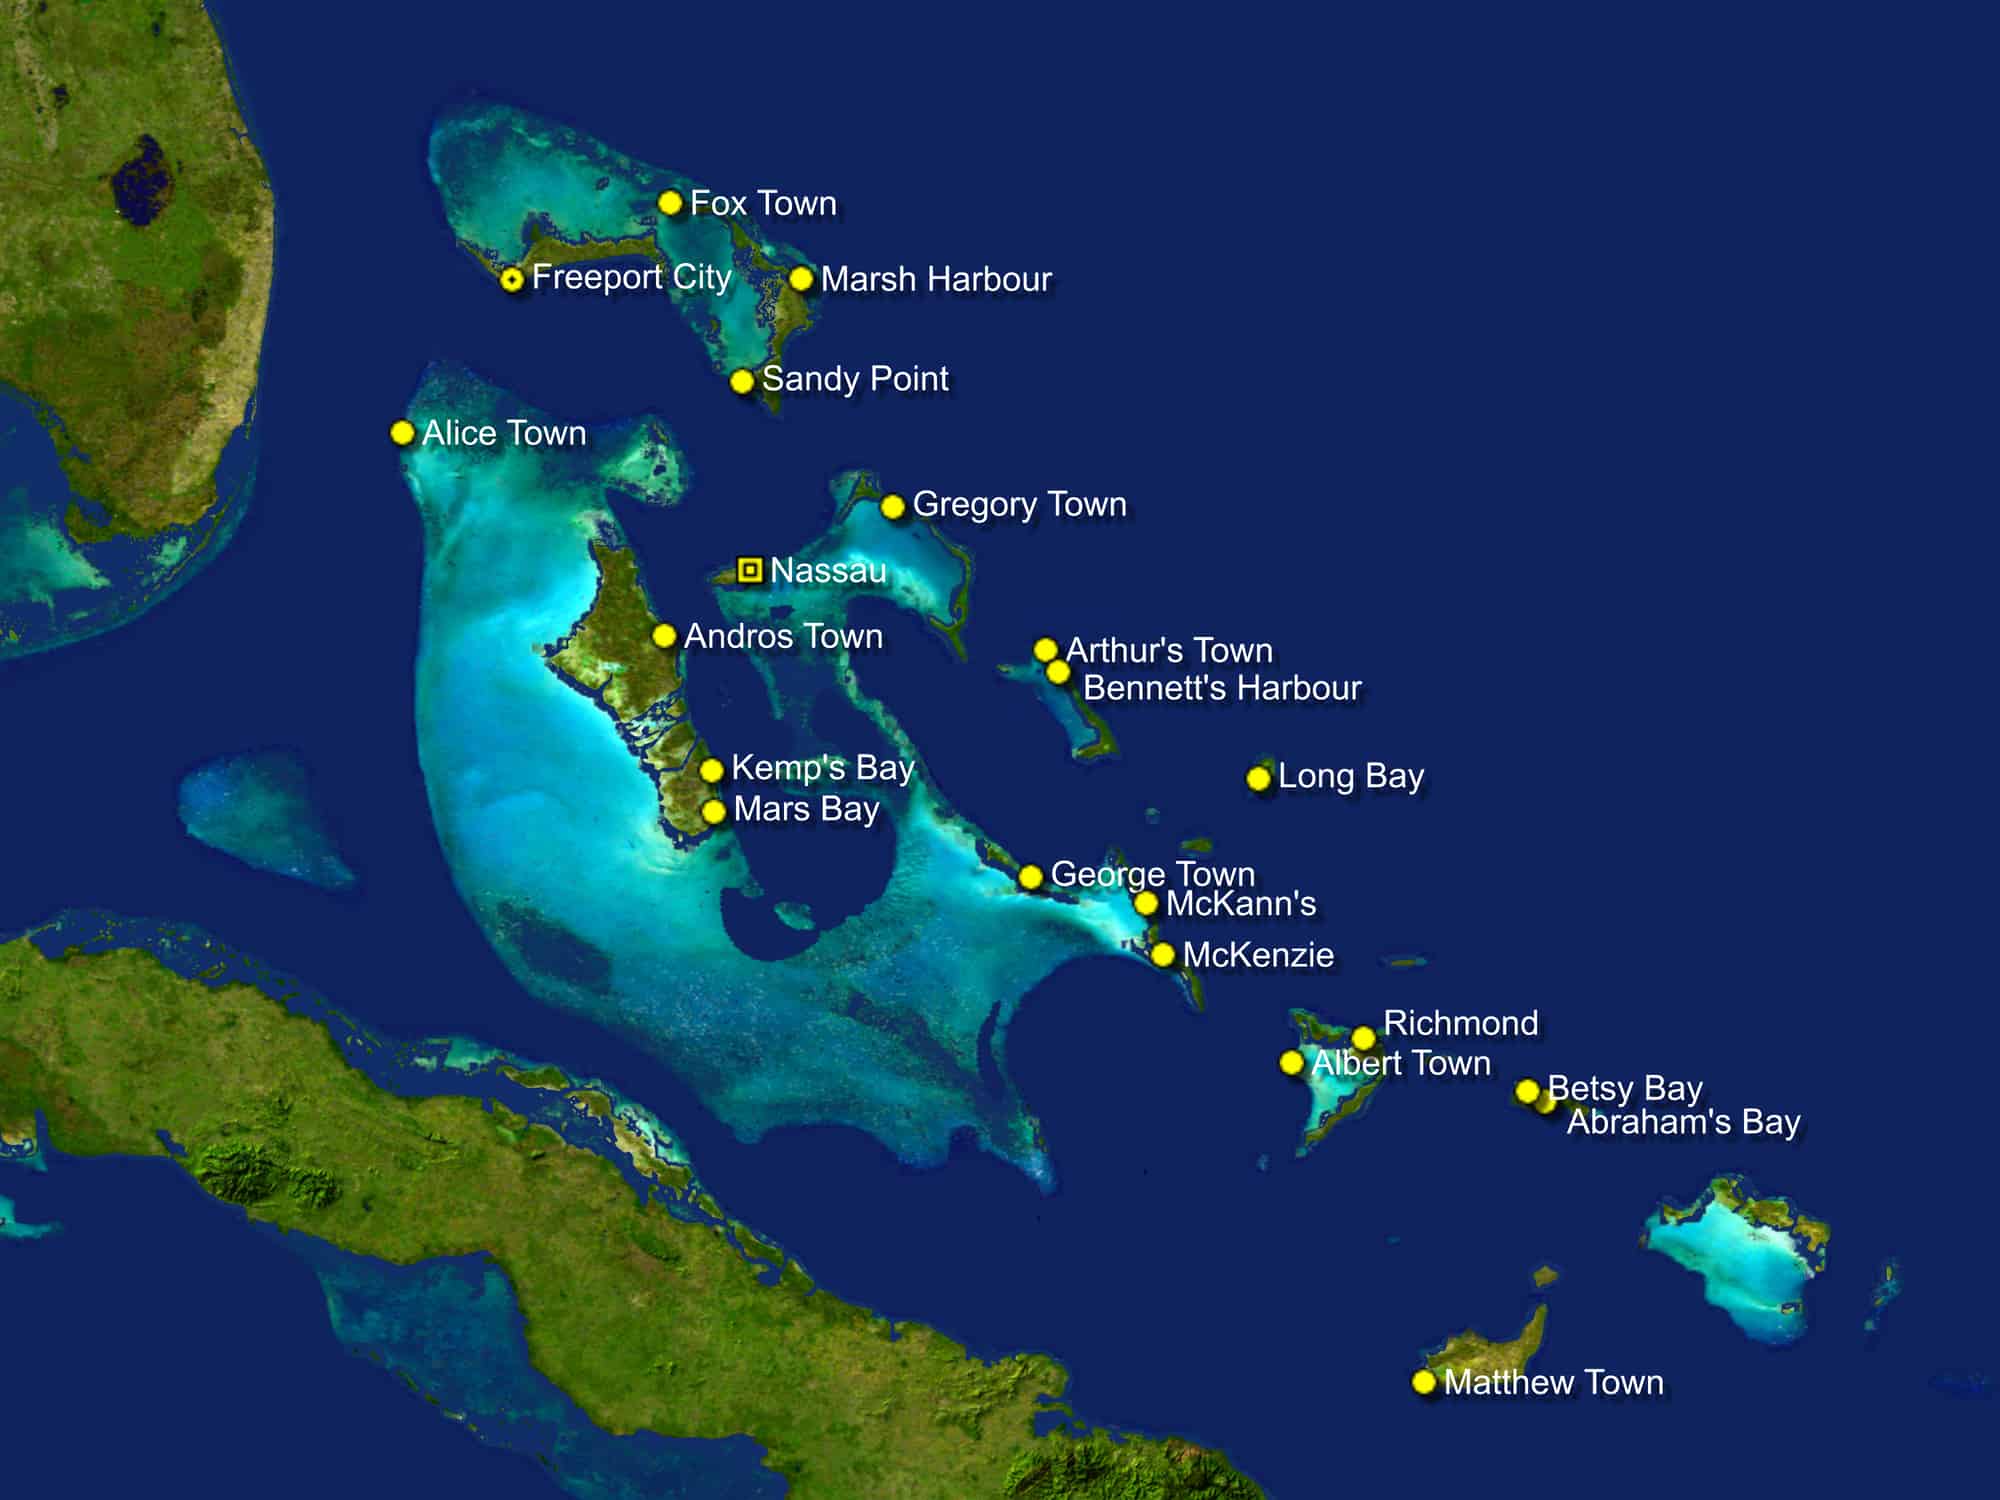 With over 700 islands and cays to choose from, the Bahamas is an ideal boating getaway destination!